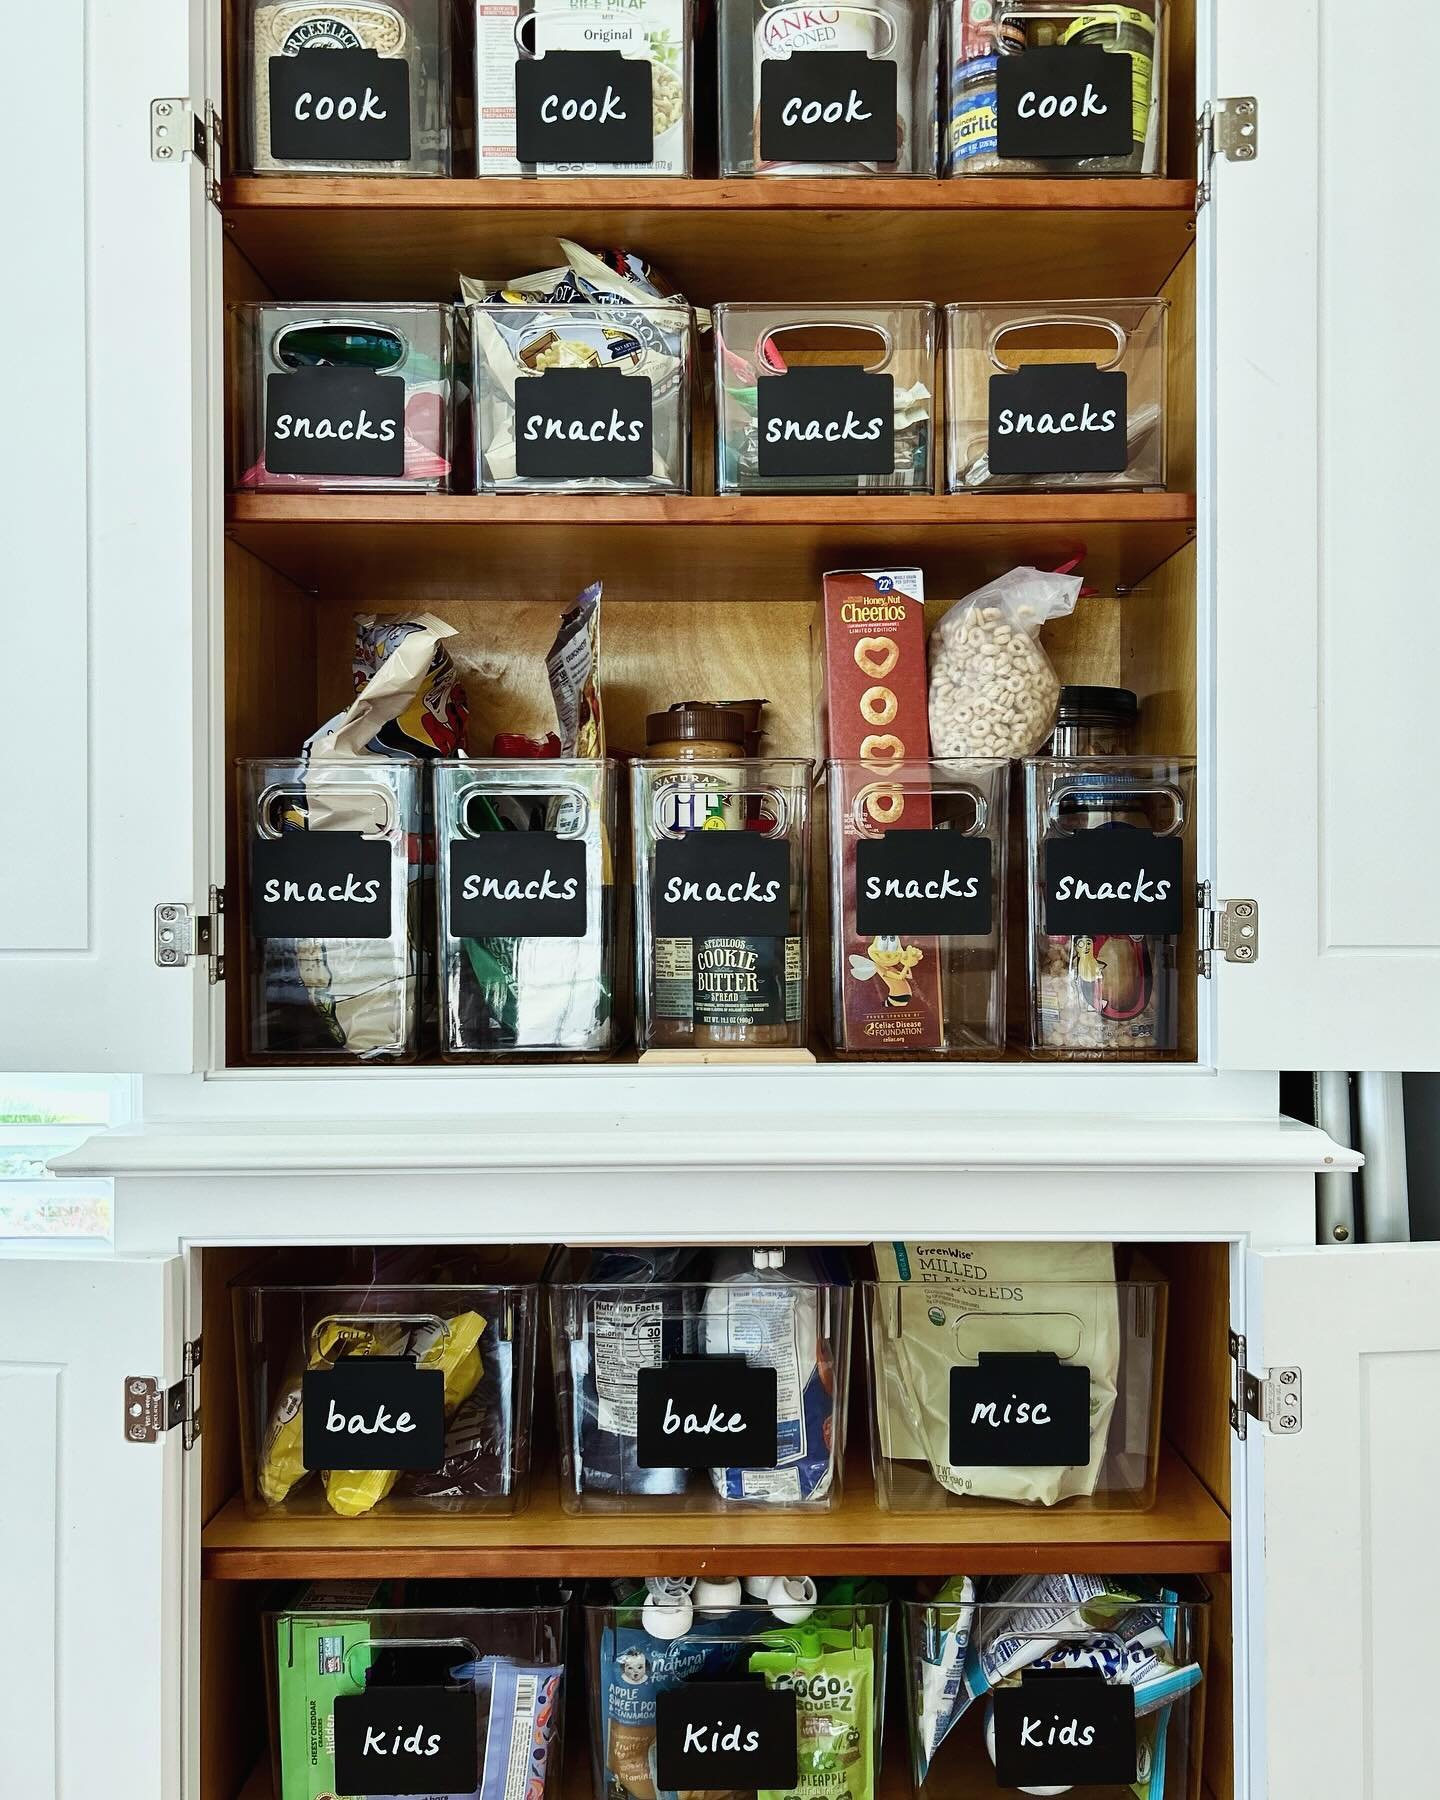 Friday Food⚜️

This pantry is weekend ready thanks to @mdesign acrylic bins, @amazon clip-on labels and some simple categorization.

I&rsquo;m also ready for the weekend and feeling especially grateful for such a hard working team, a thriving busines